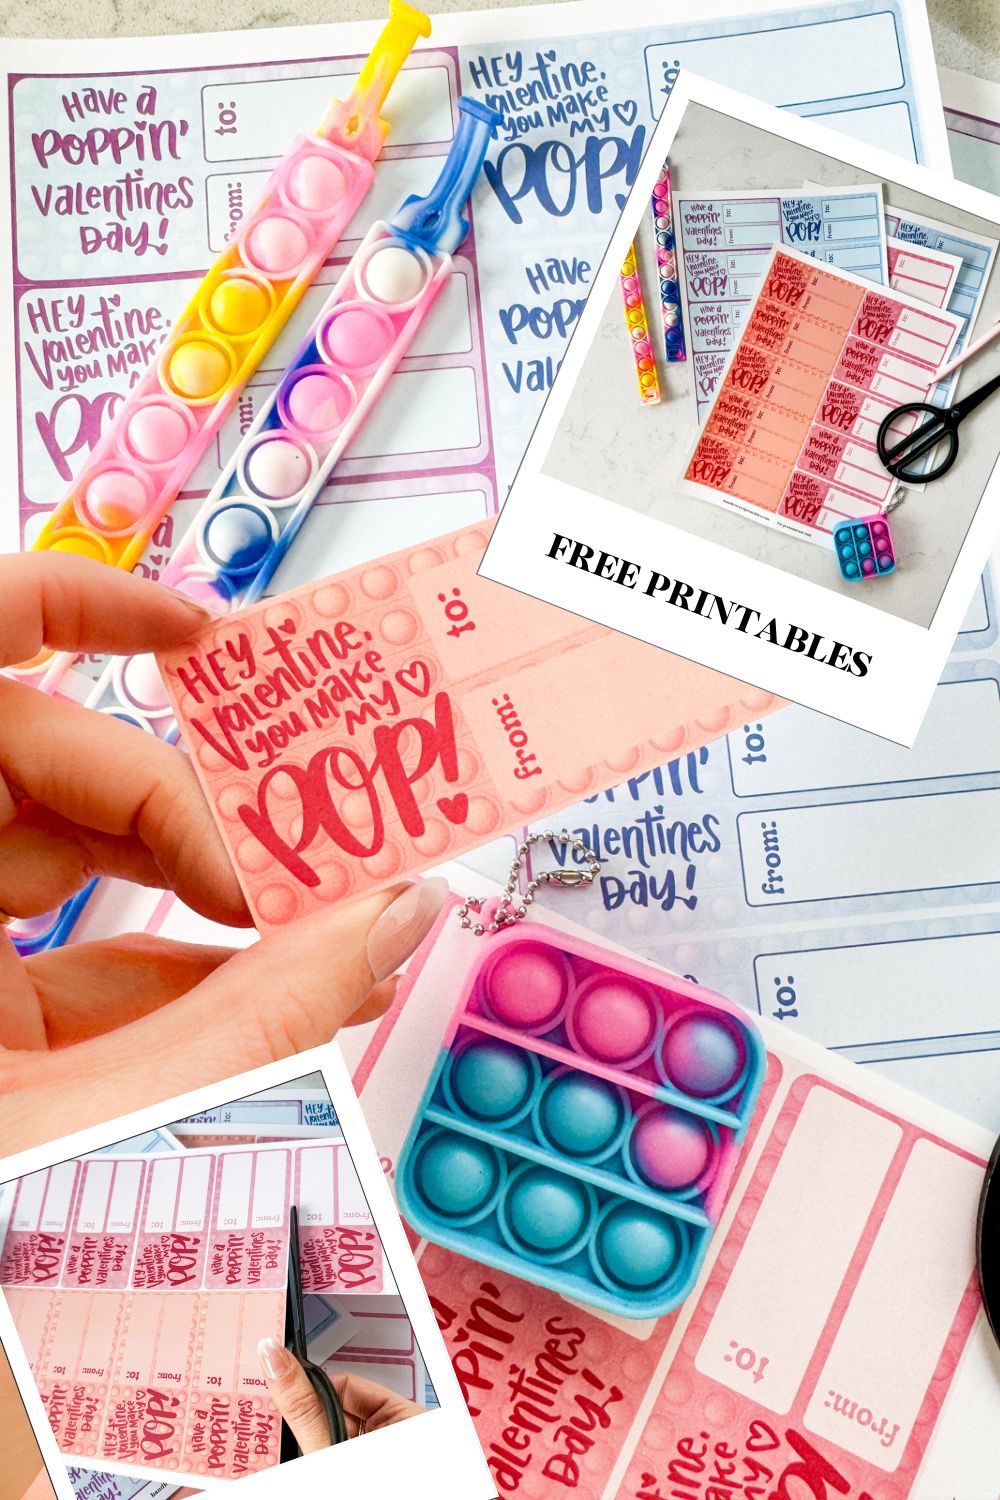 text reads: free printables pop it themed valentines cards printed and styled with popits. 4 color schemes with two sentiments: hey valentine, you make my heart pop' (held in photo) and 'have a poppin valentines day'. image overlay shows printables printed full sheet before being cut to size. second image overlay shows valentines being cut to size.